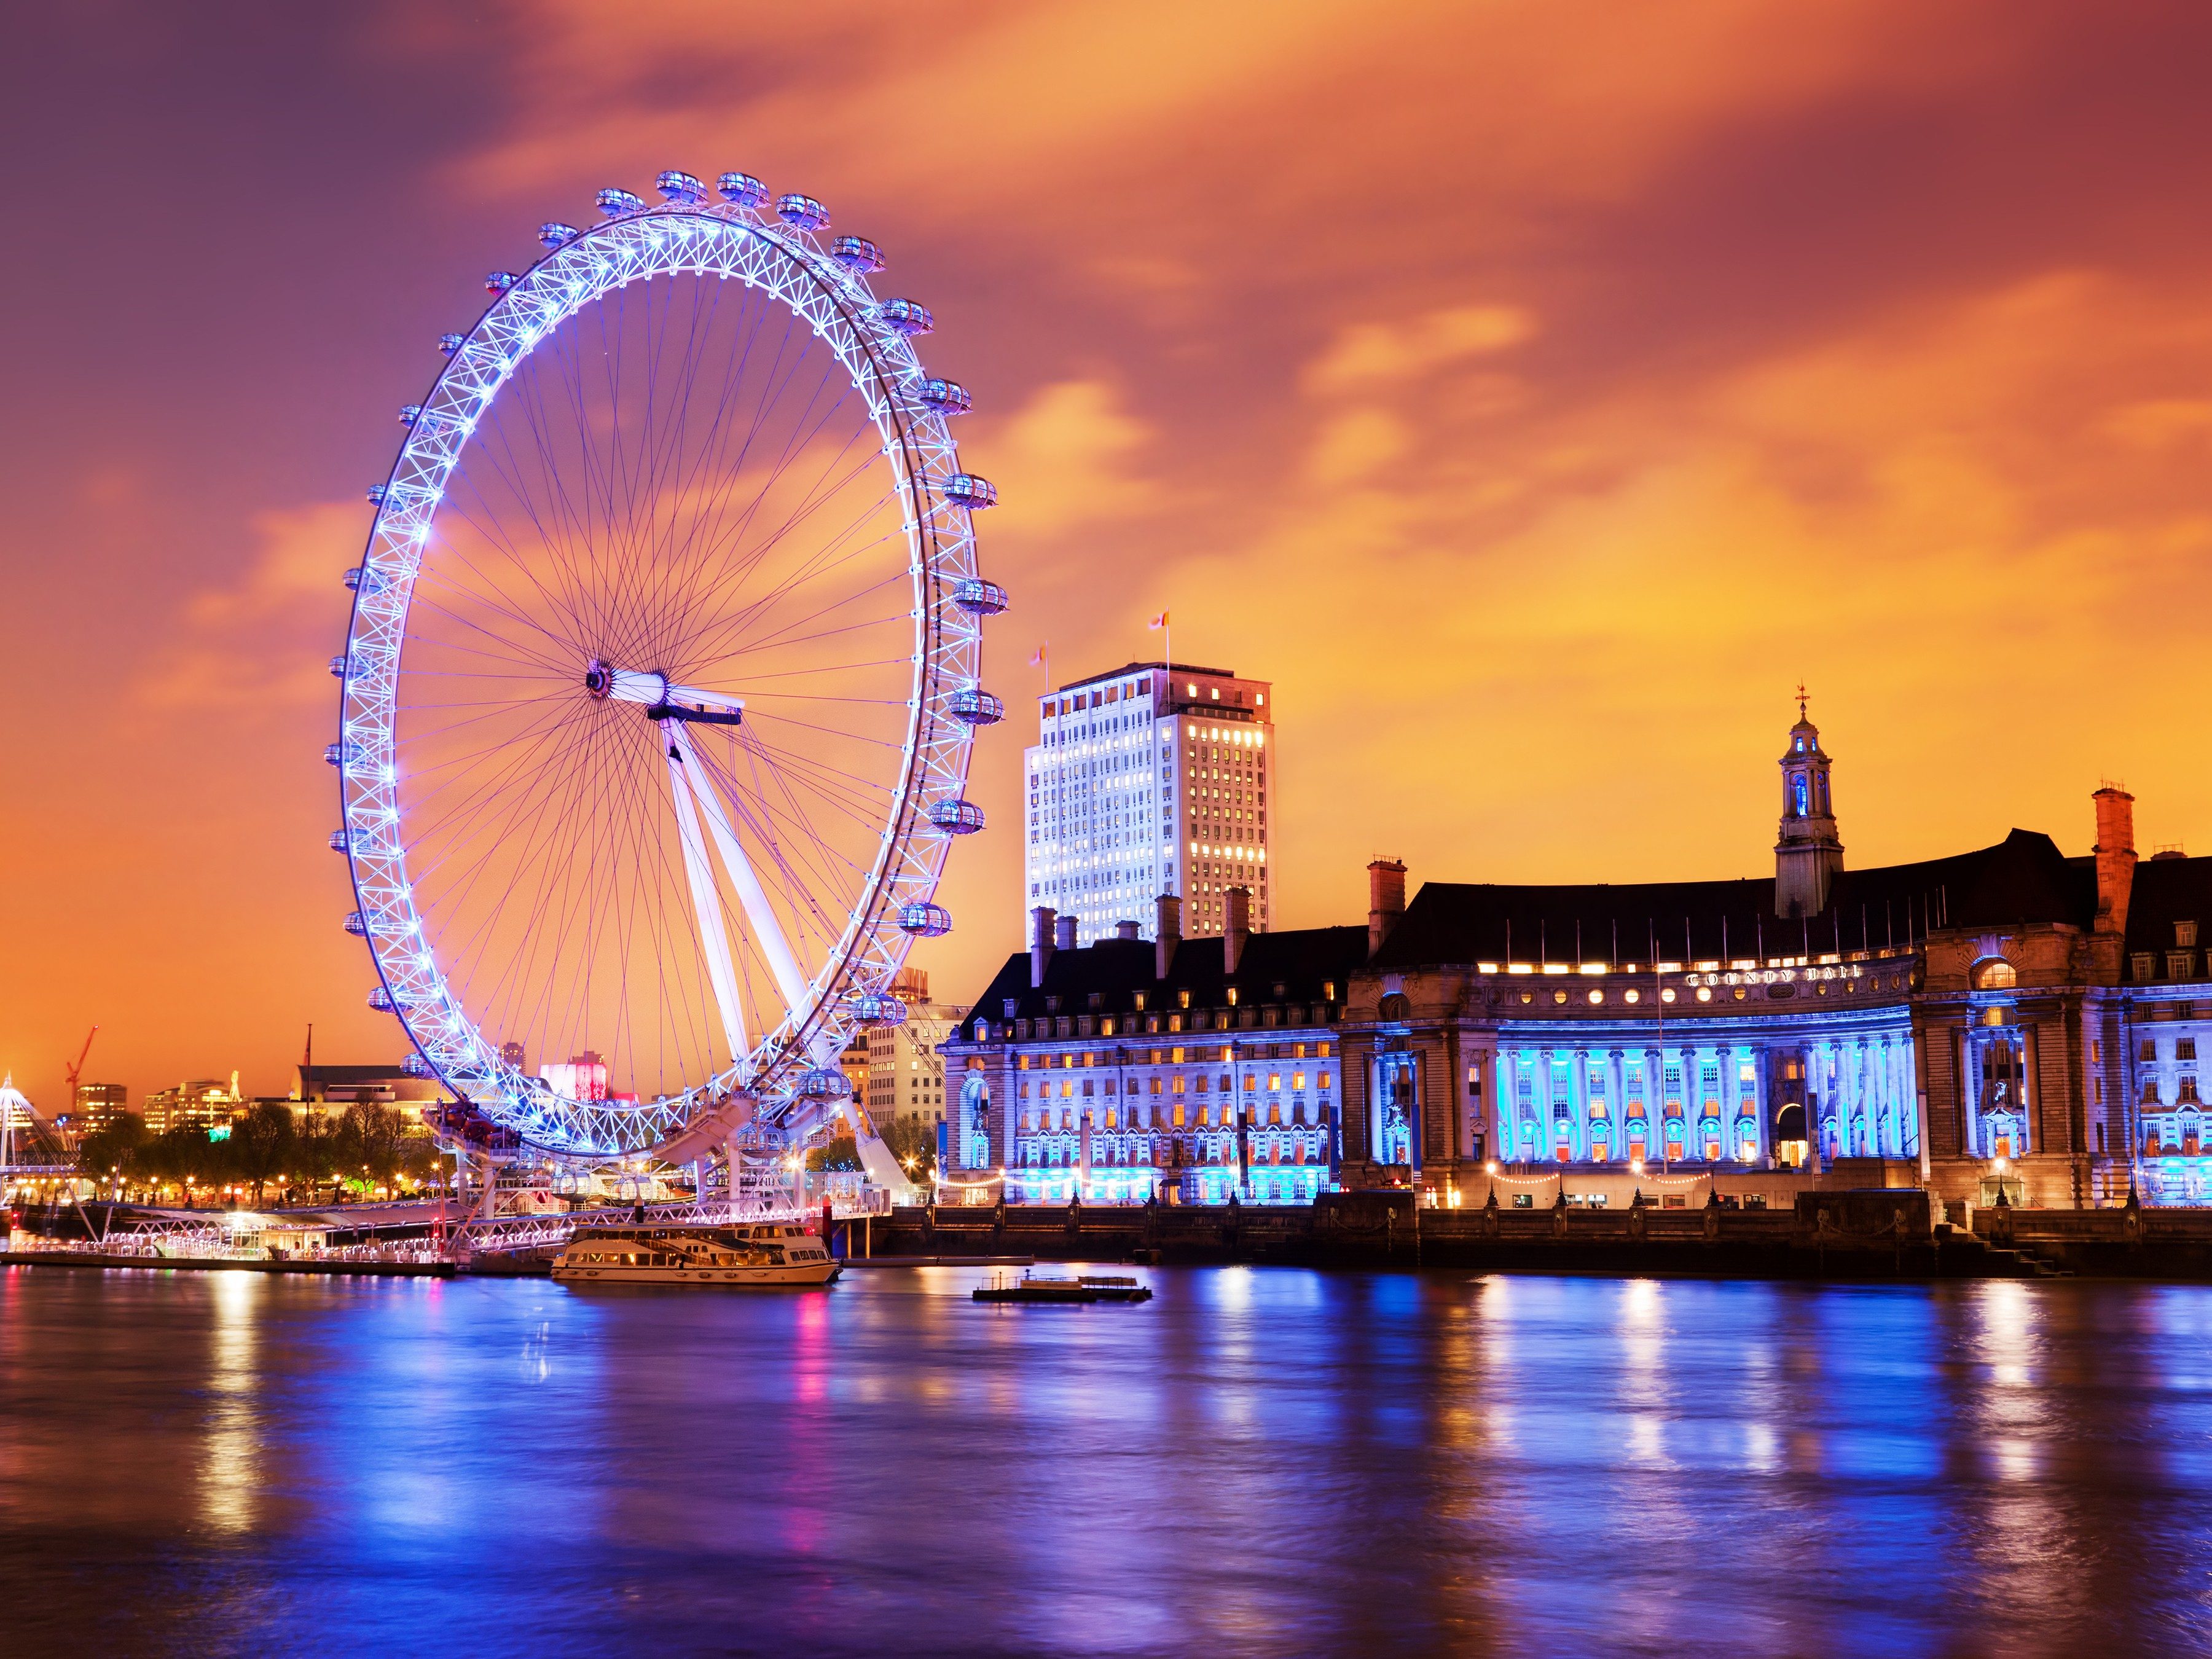 51 London Attractions You Must See Before You Die